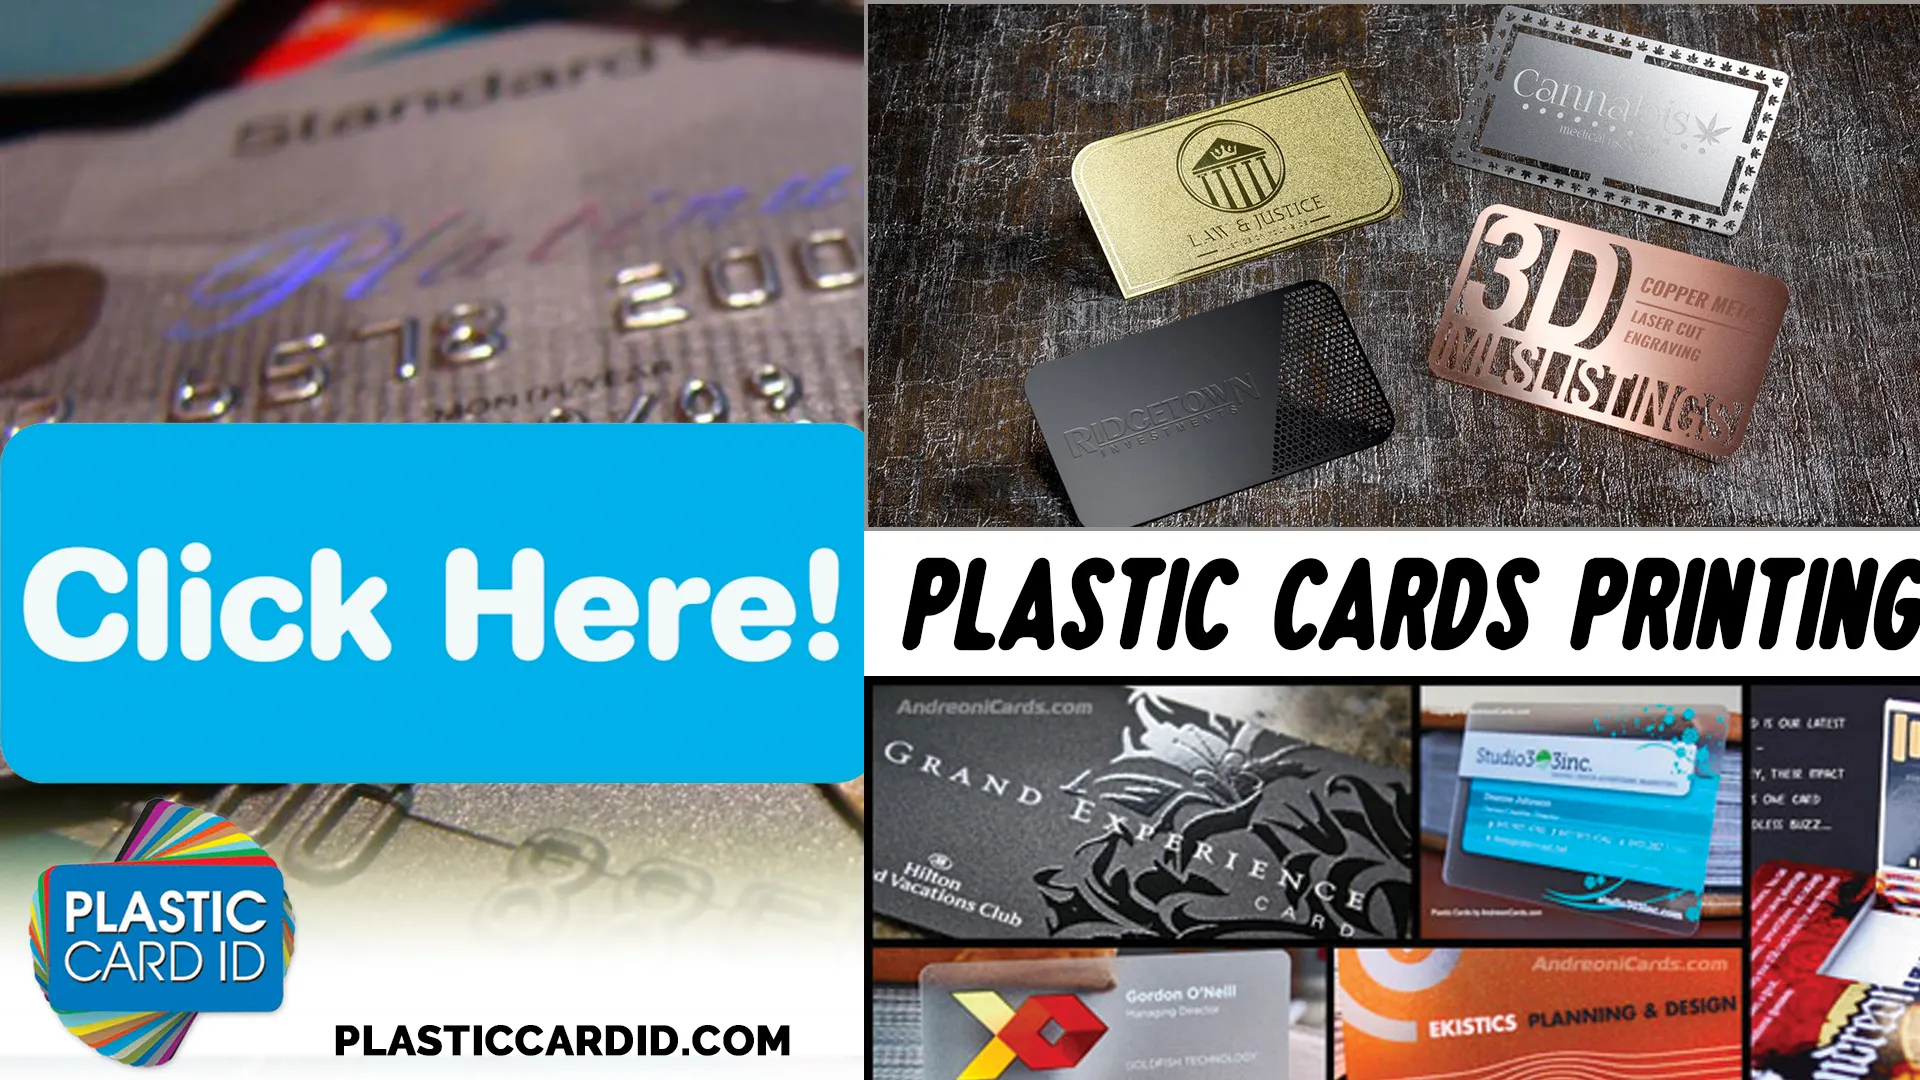 Keeping Your Cards in Circulation with Easy Recycling Tips